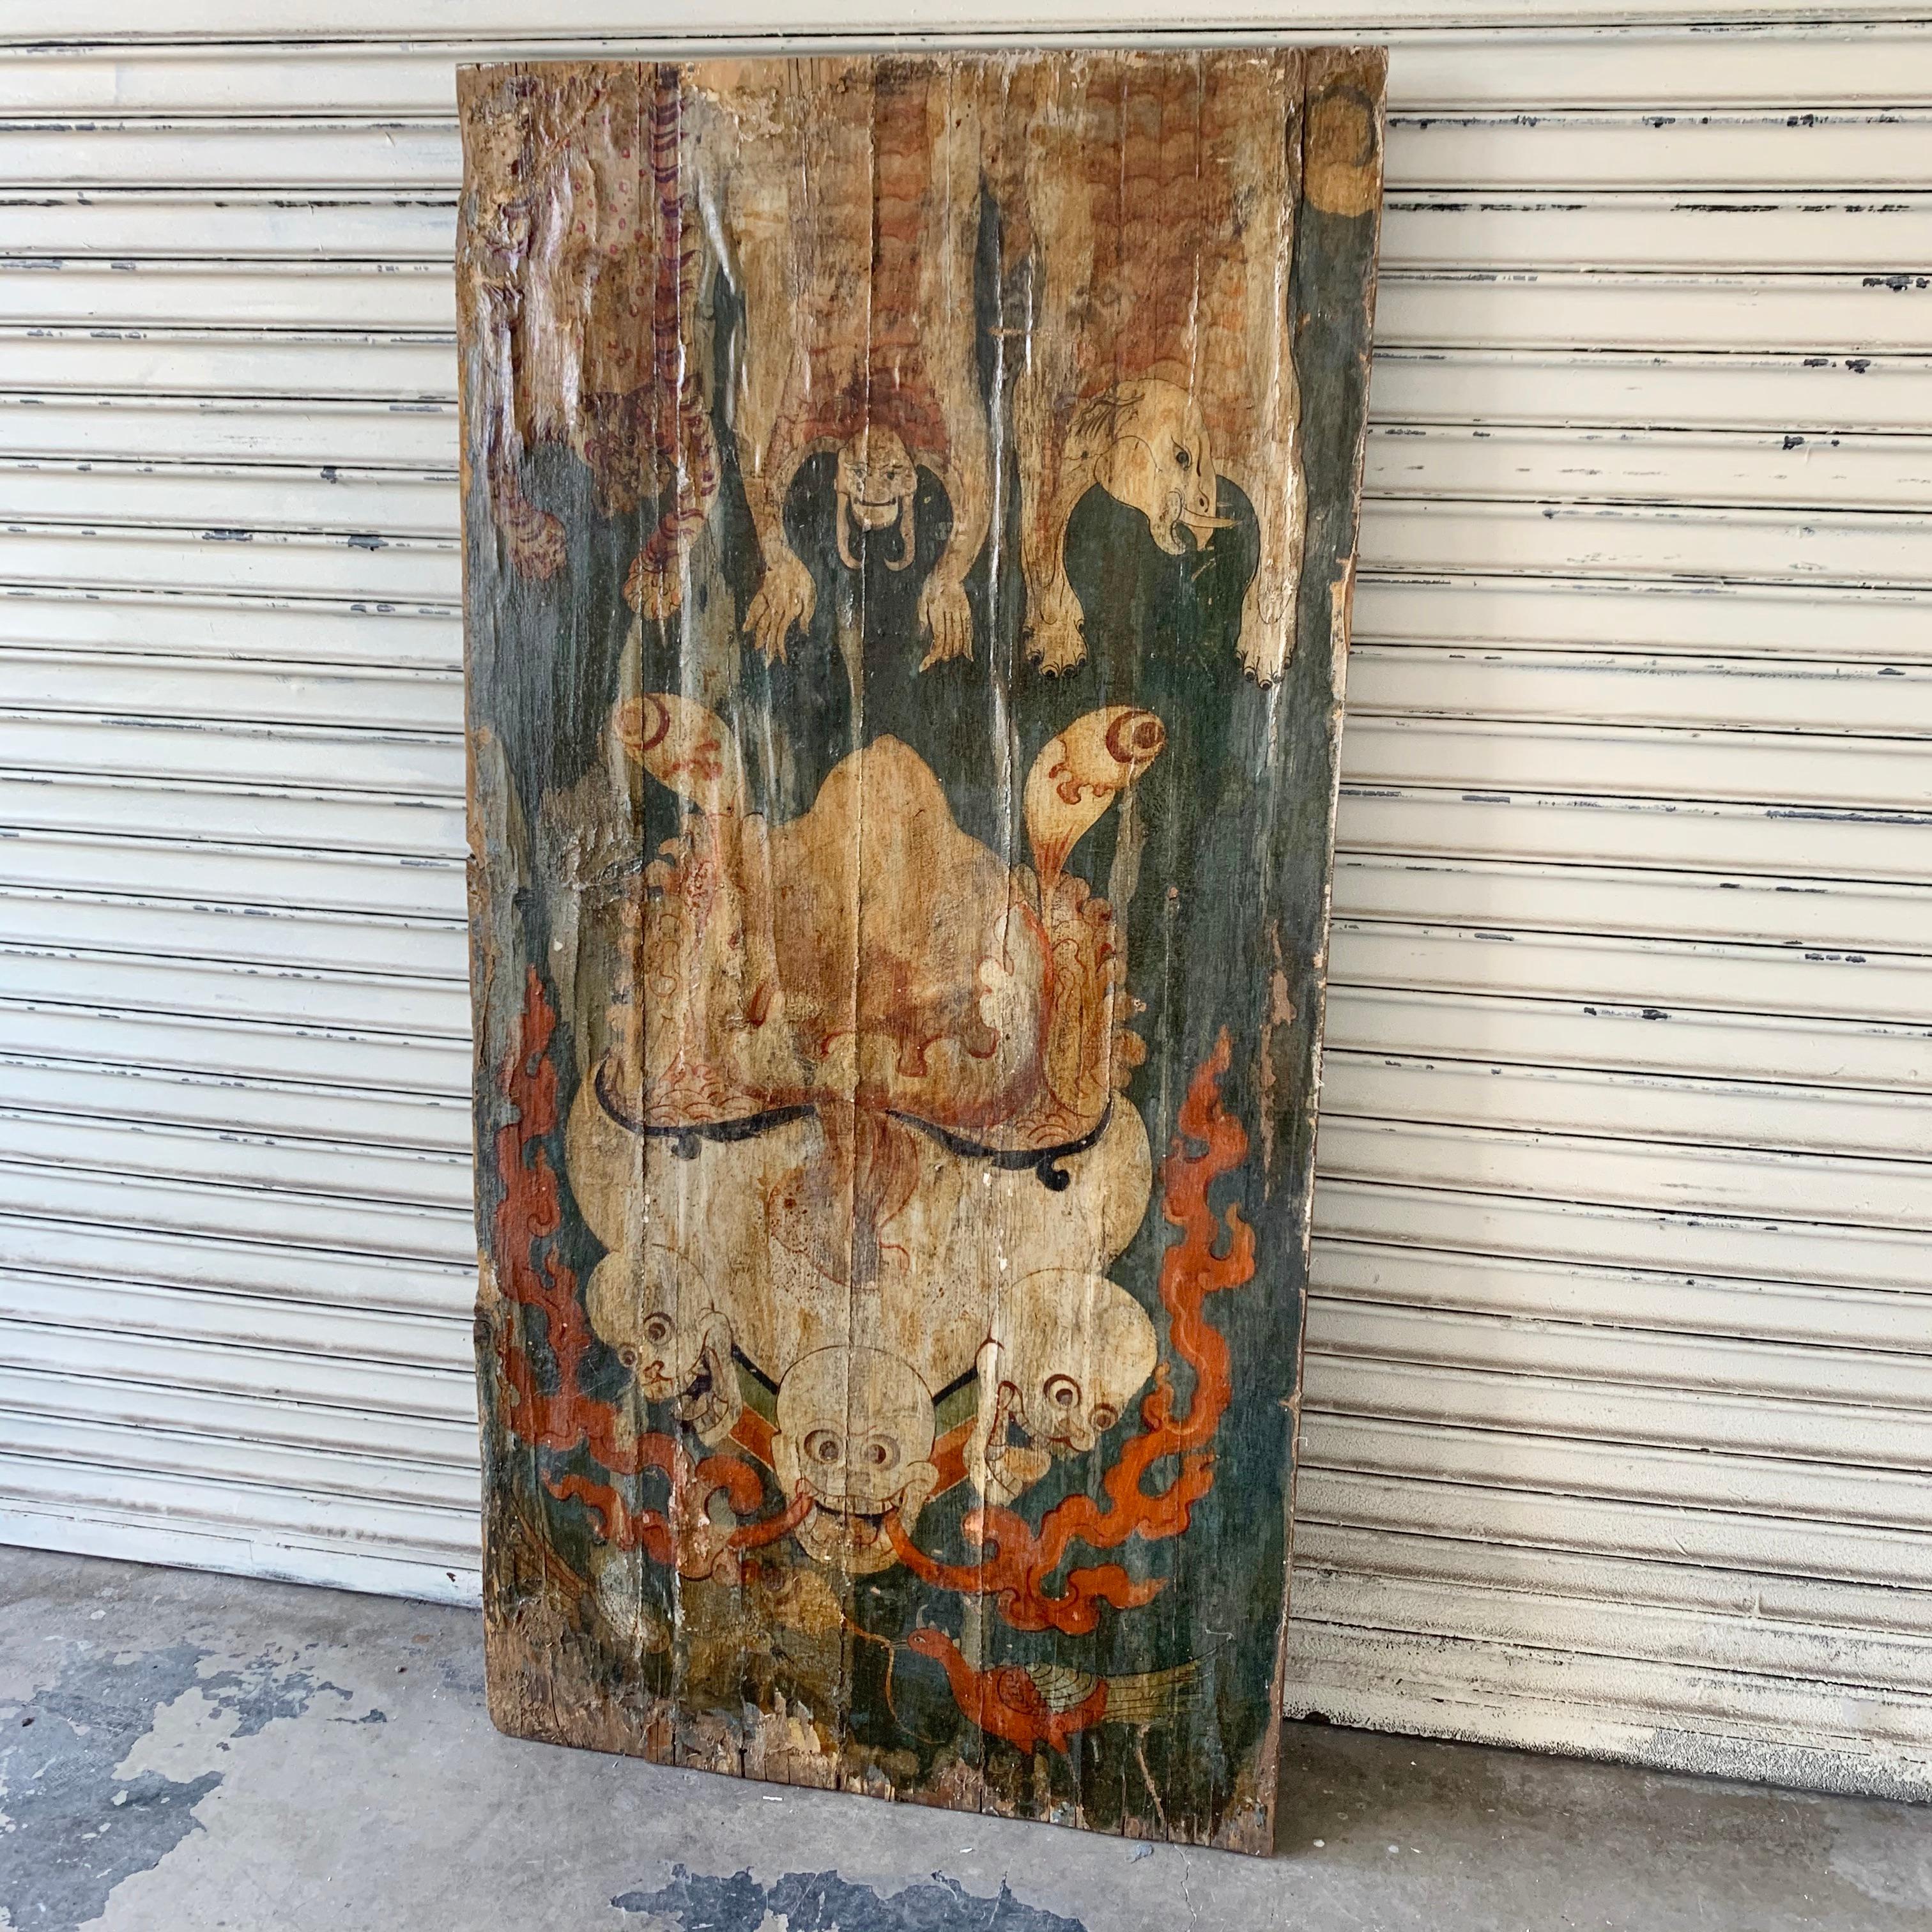 Unusual painting on fabric depicting a cauldron with skulls, birds, eyeballs, and tigers. Adhered to a wood panel. Great presence. Condition shown in photos. Large scale. Measures: 3 feet wide x 5.5 feet tall.